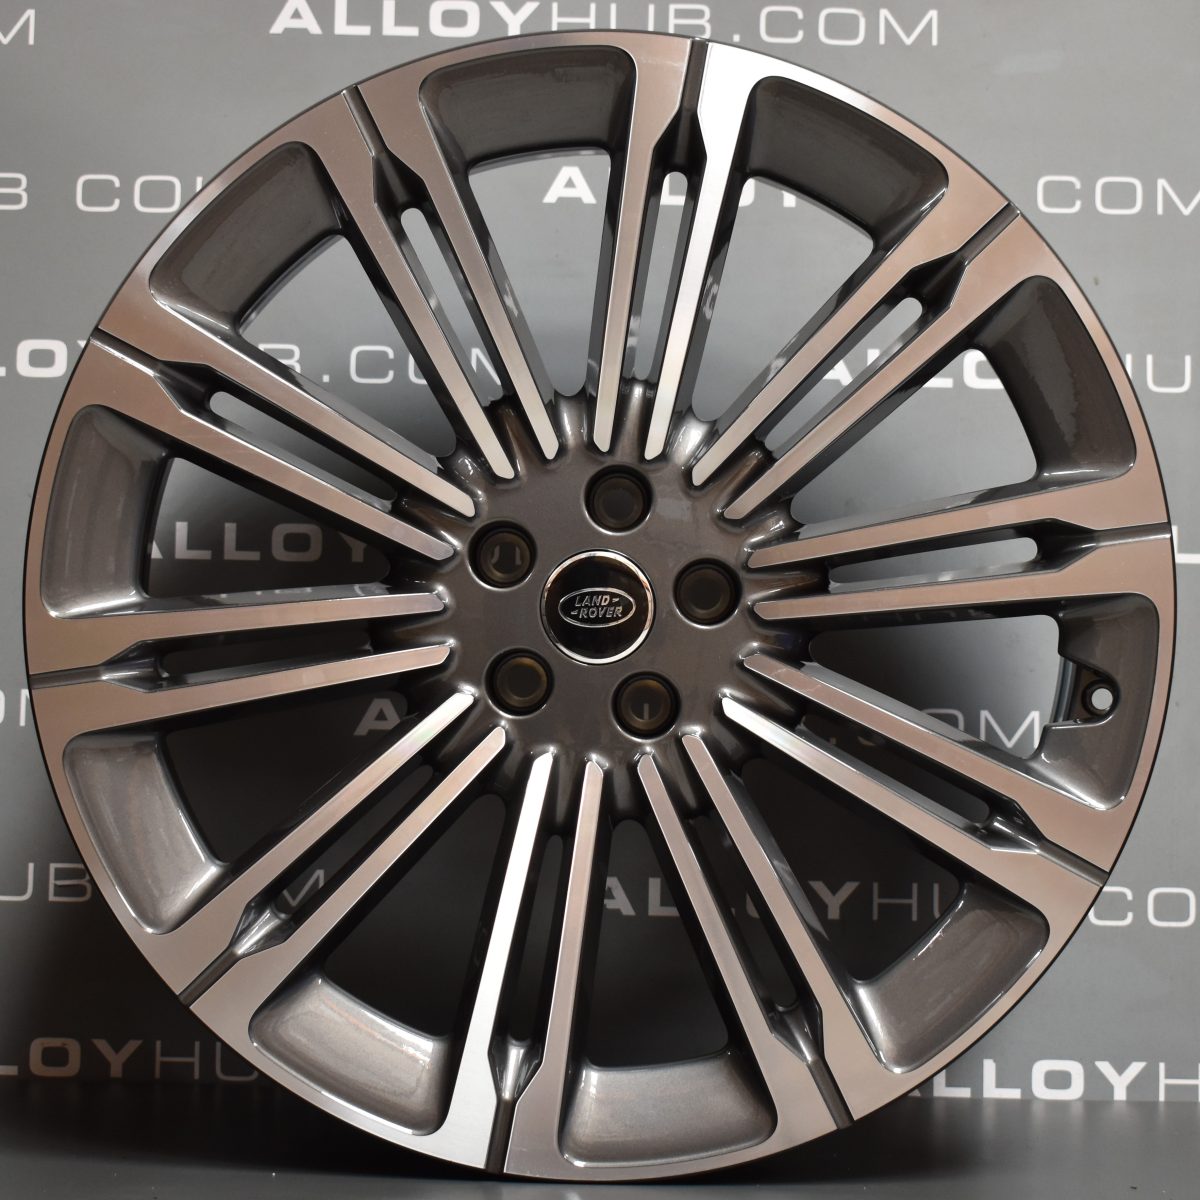 Genuine Land Rover Range Rover Vogue L460 Style 1075 10 Spoke 23" inch Alloy Wheels with Grey & Diamond Turned Finish LR153247